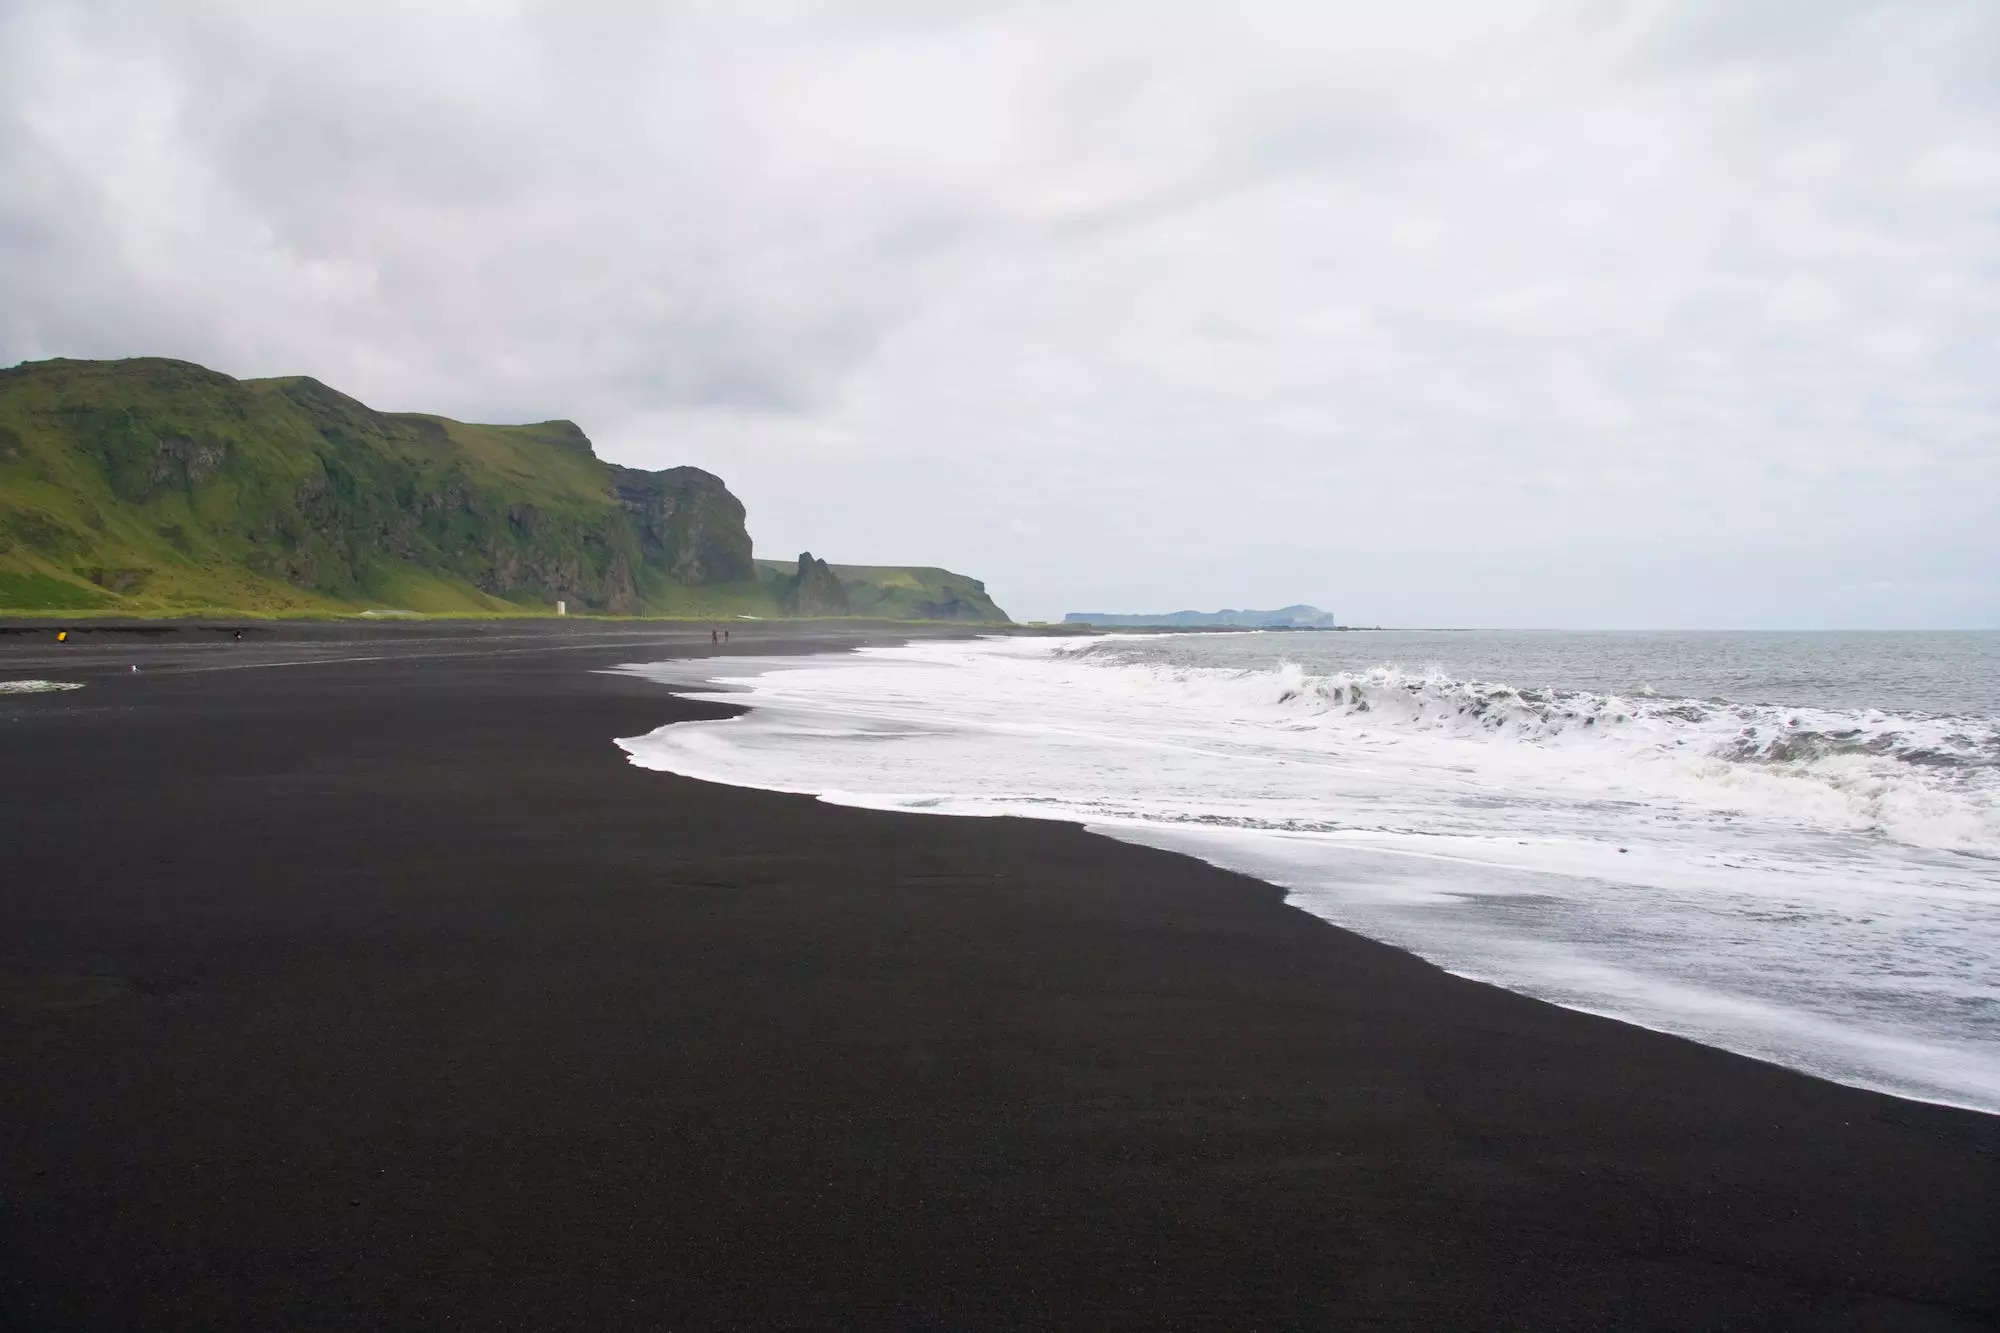 A view of the black-sand beach in Iceland.